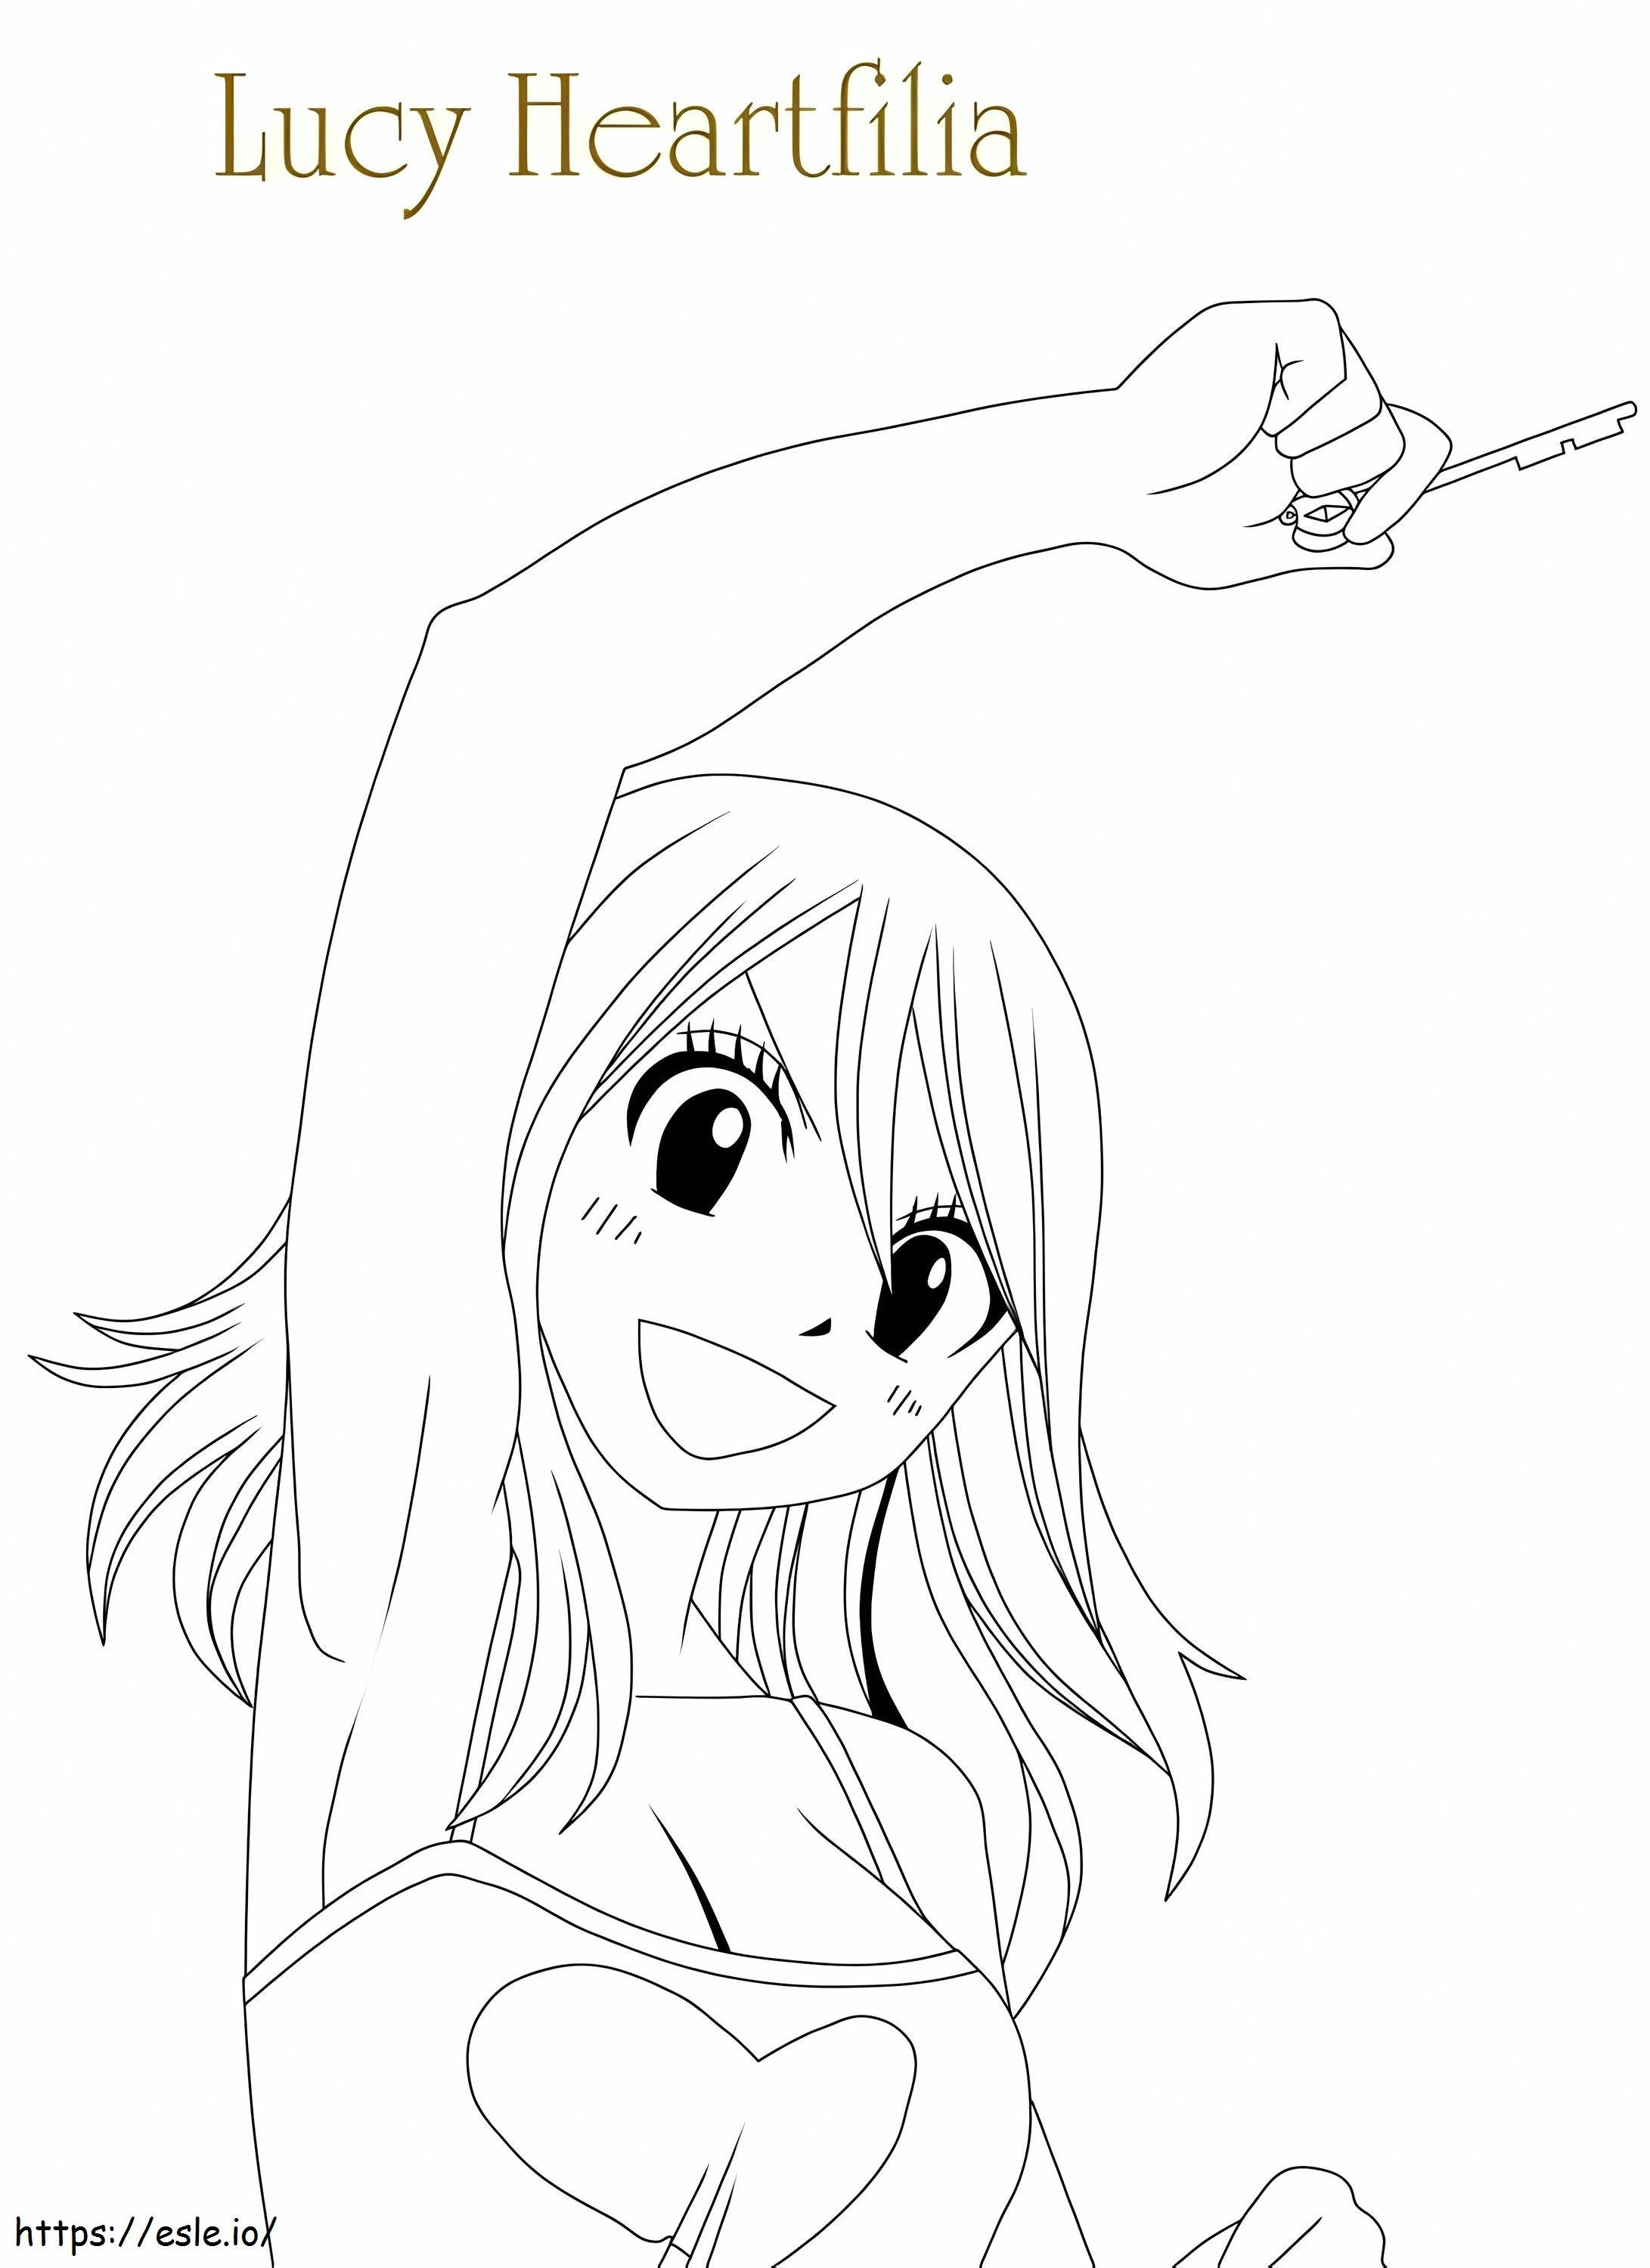 Lucy Heartfilia Fighting coloring page